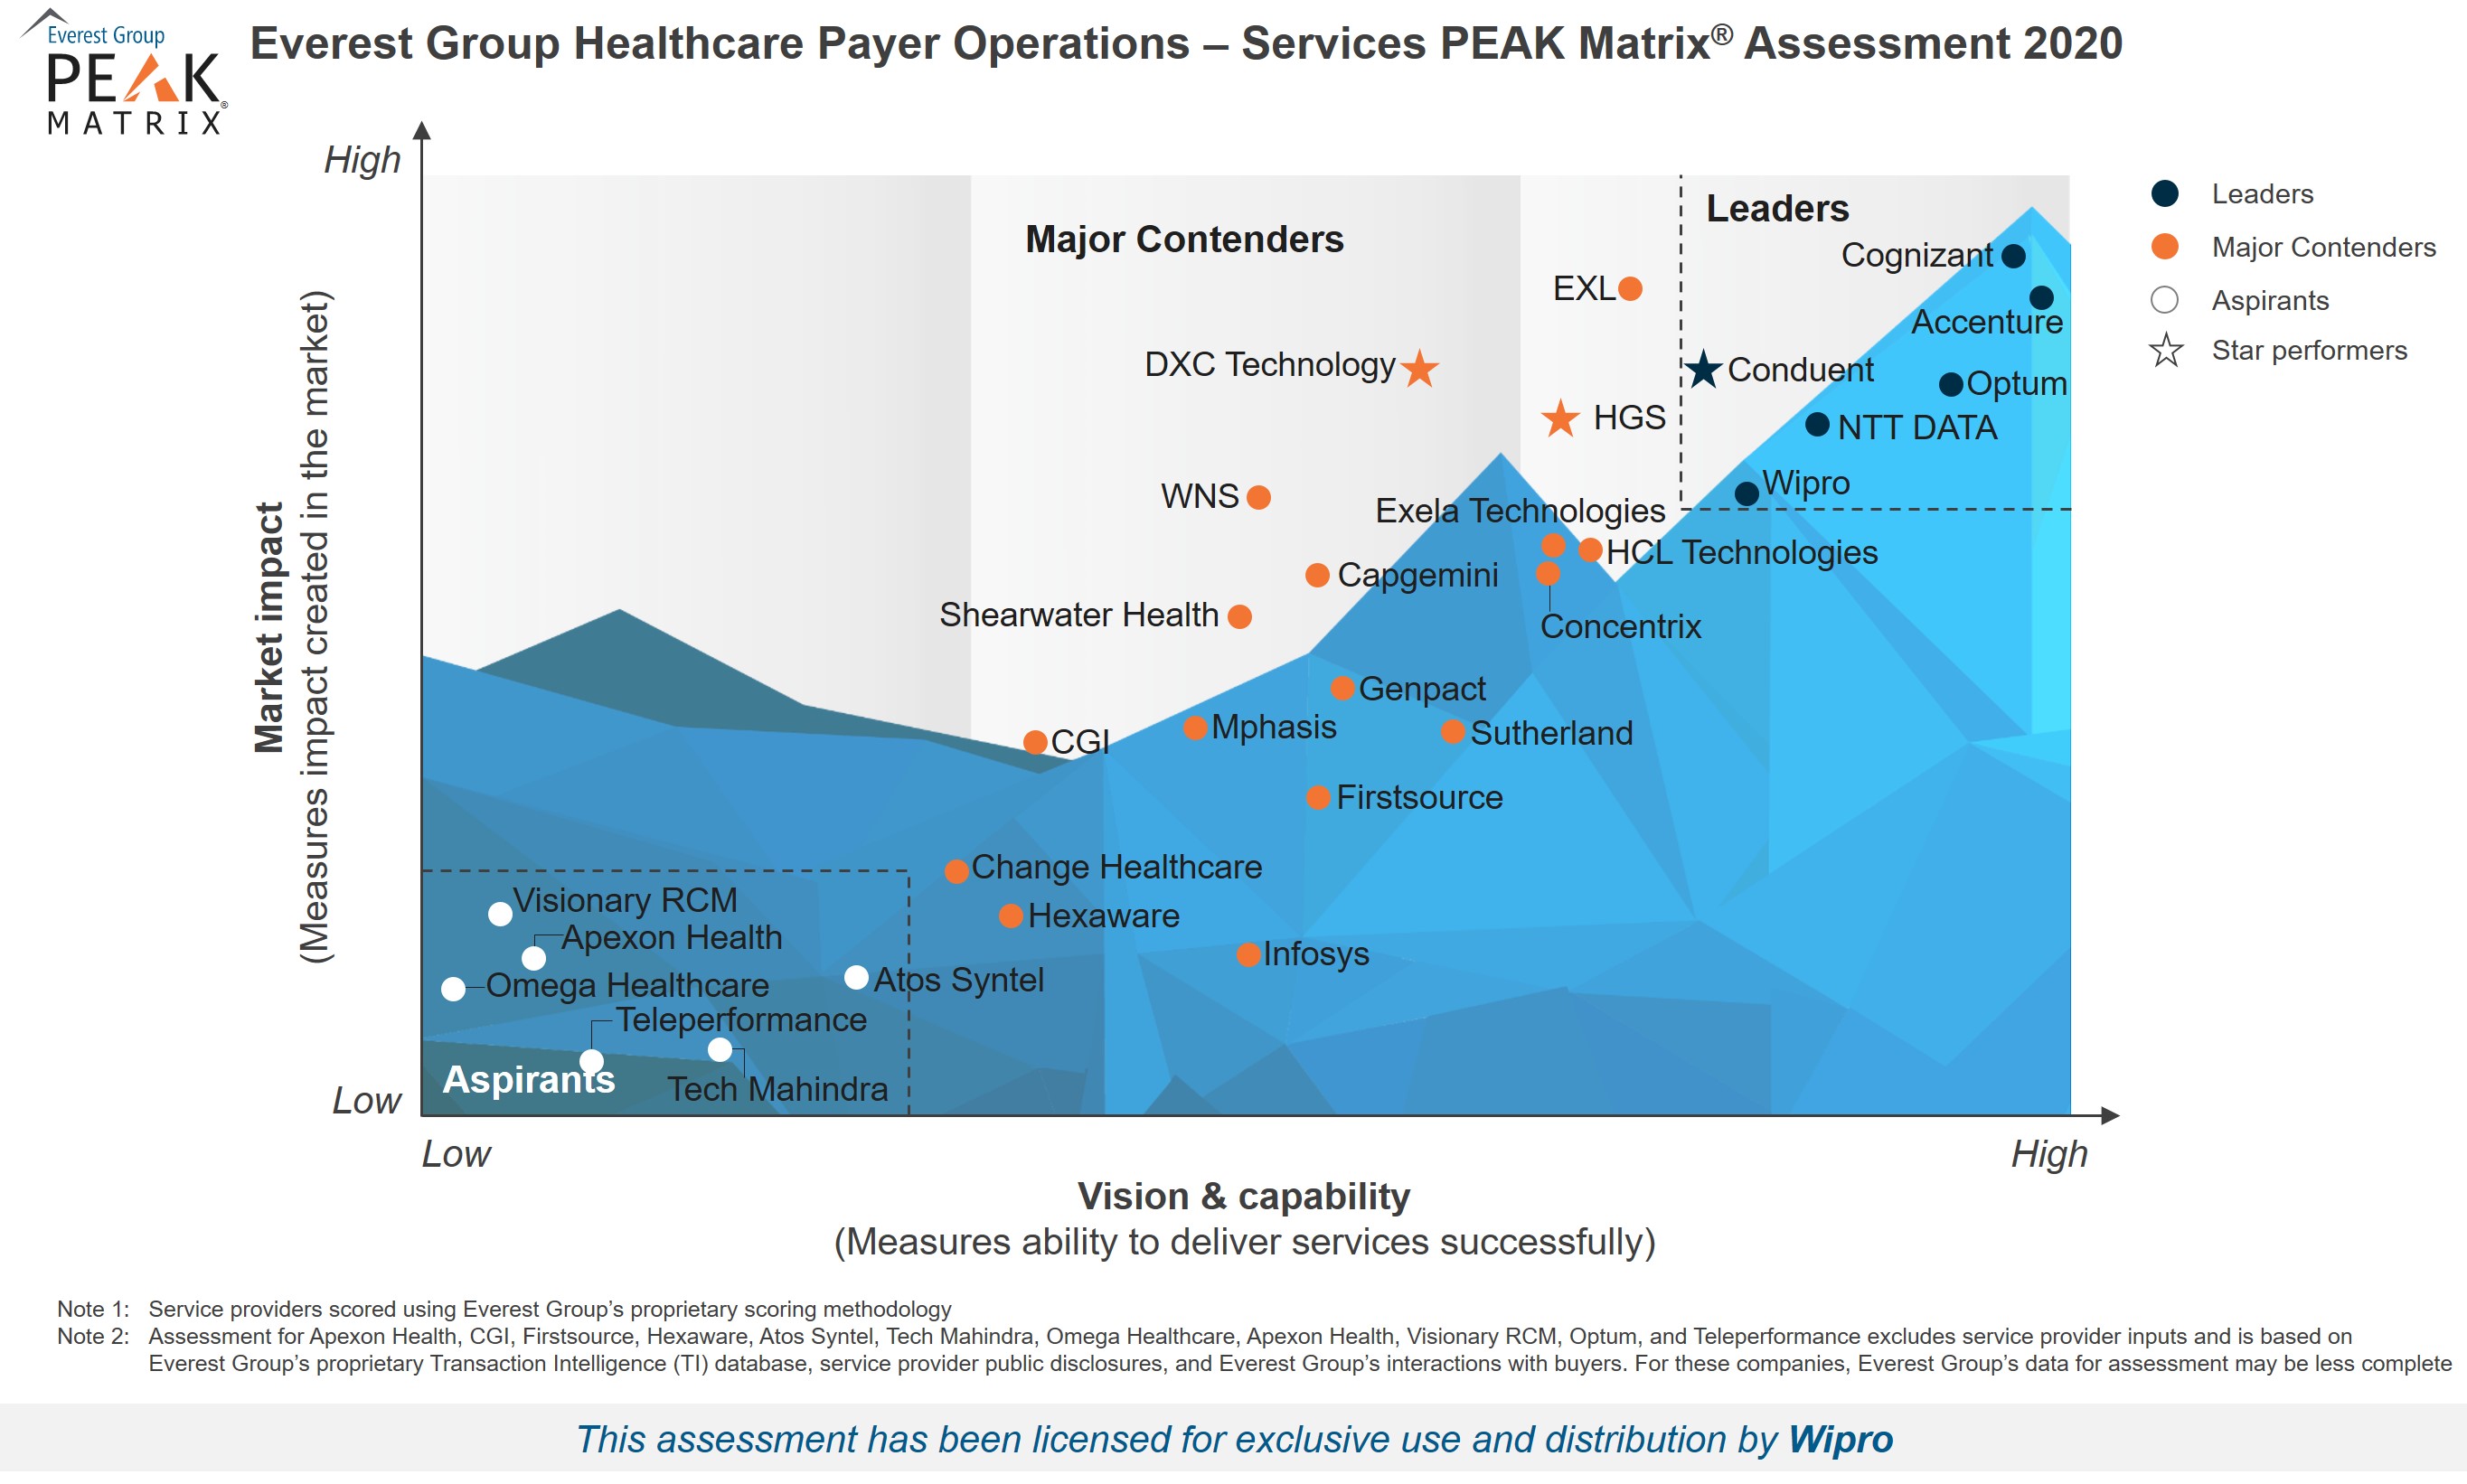 Wipro positioned as a Leader by Everest in Healthcare Payer Operations Services PEAK Matrix® Assessment 2020  